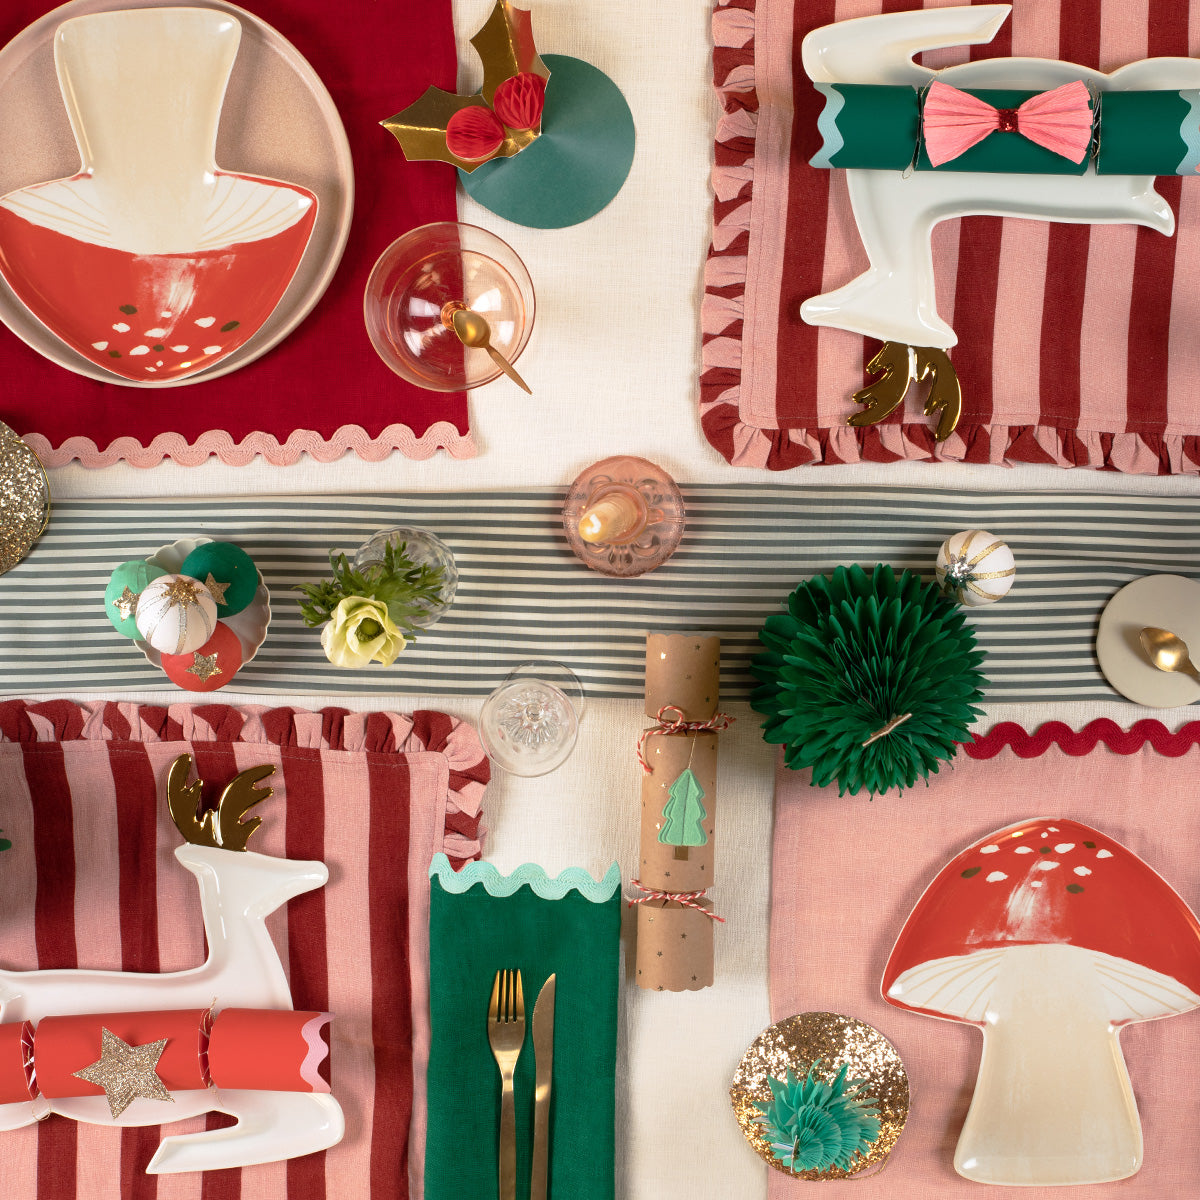 Our green, pink and red fabric napkins, with ric rac details, are perfect for Christmas tableware.